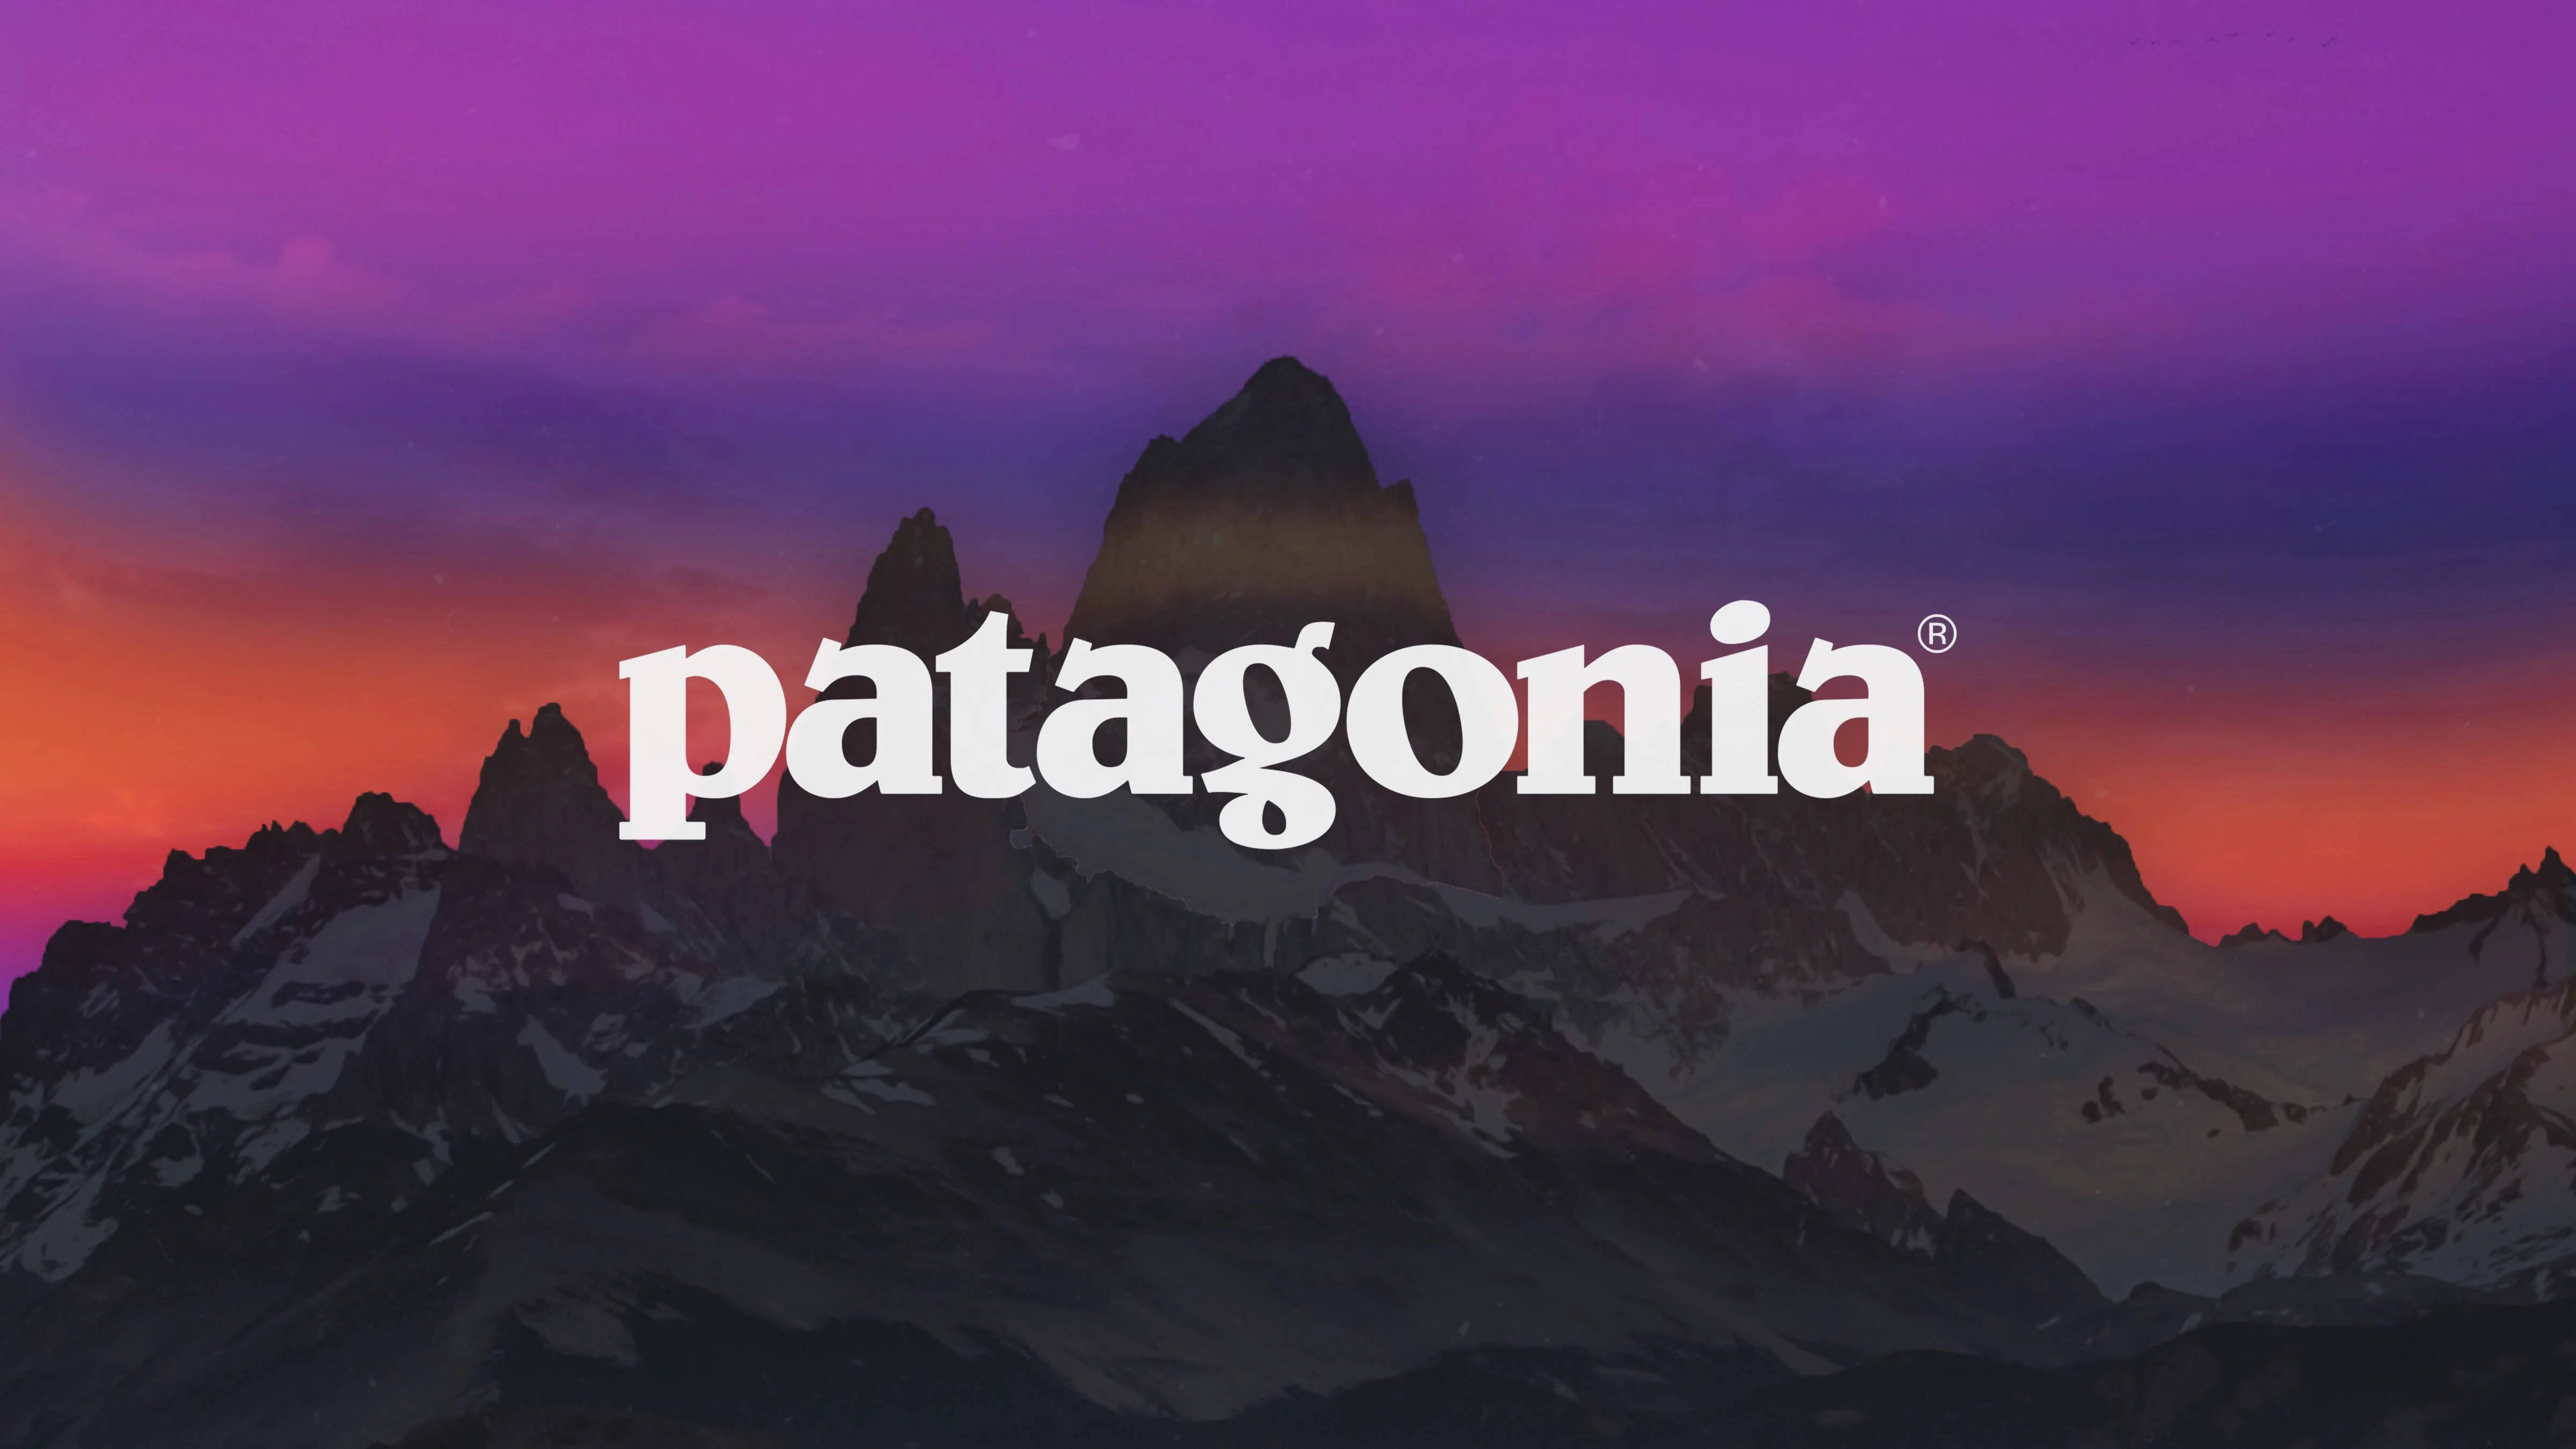 Download Iconic Patagonia Logo In High Resolution Wallpaper ...